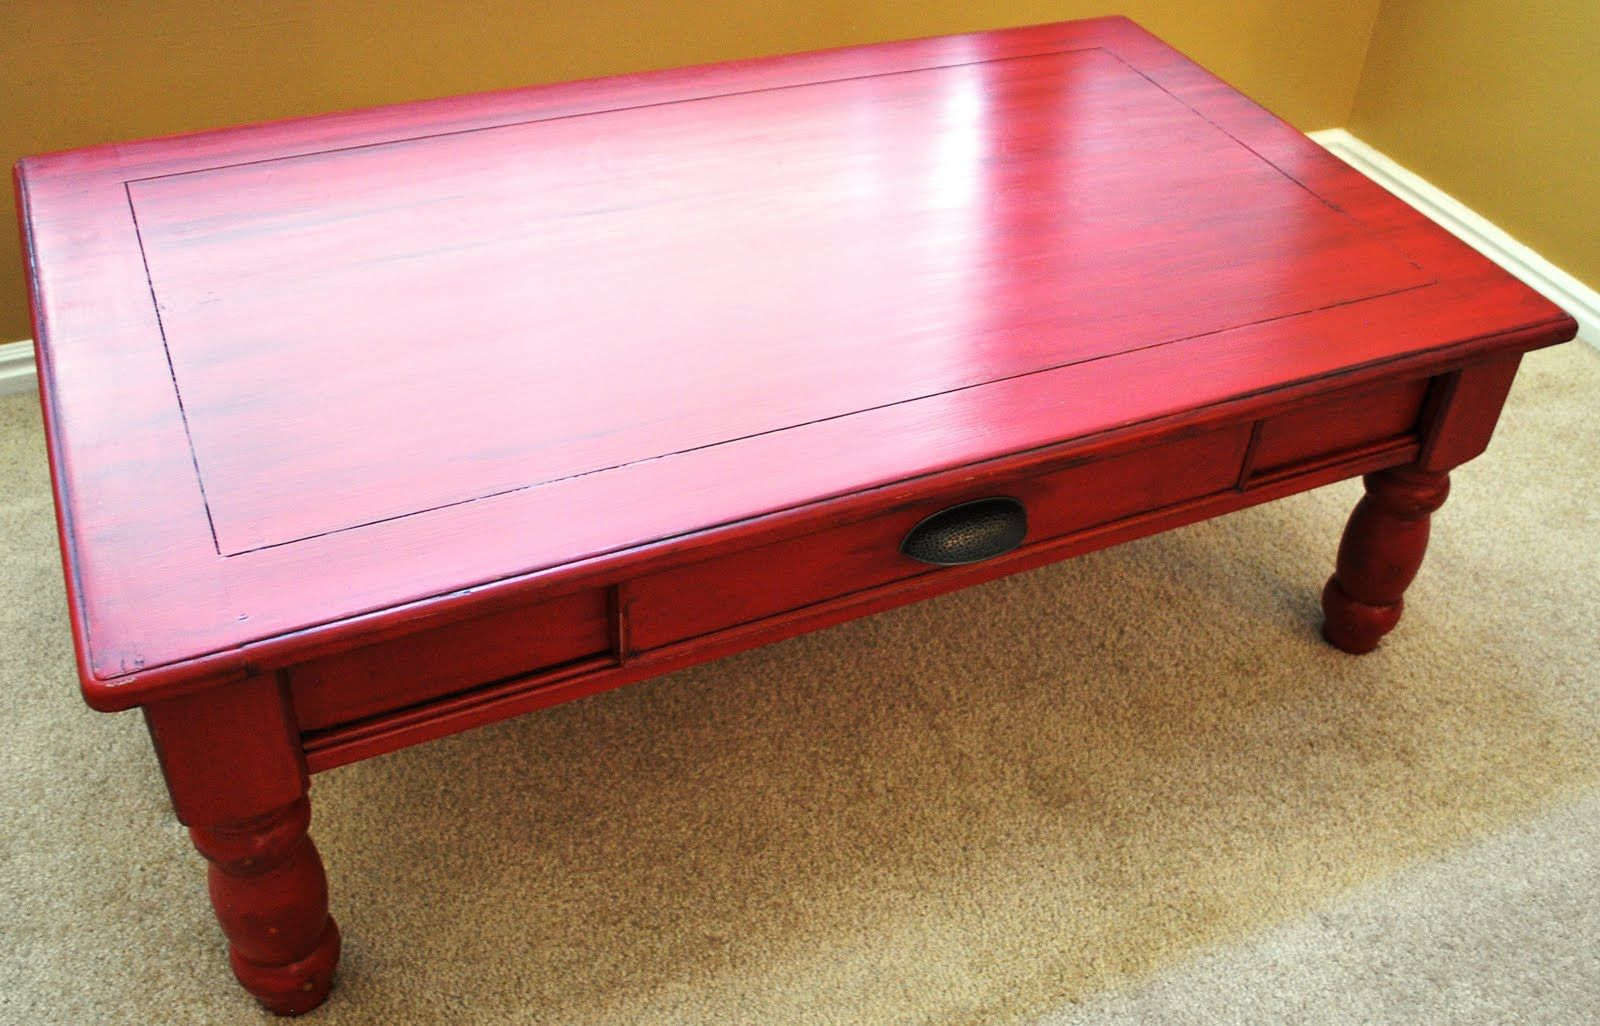 Love The Redblack Painted Coffee Tables Red C intended for sizing 1600 X 1026